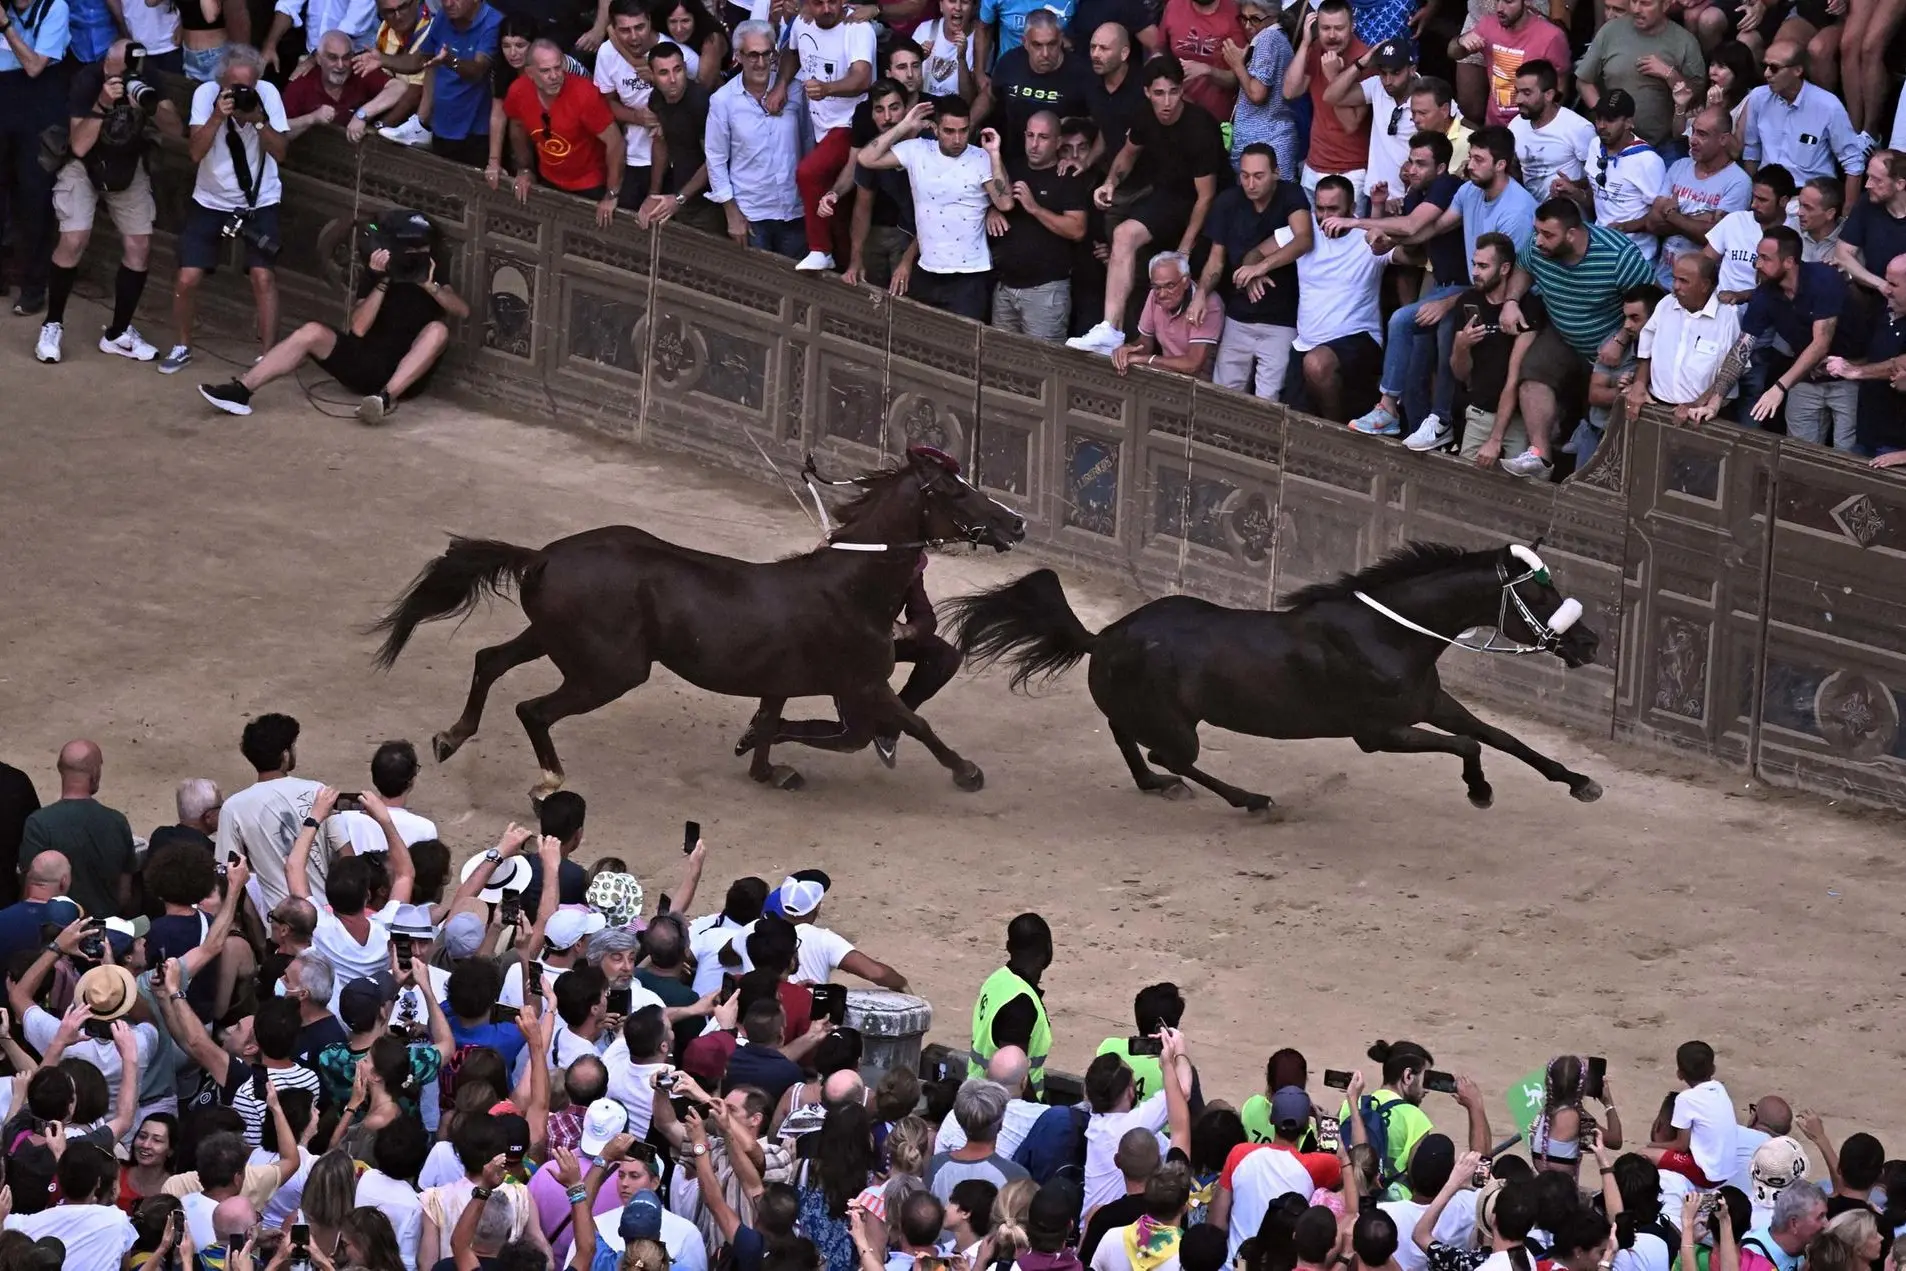 Oca horse “ Zio Frac” wins the historical Italian horse race Palio di Siena, in Siena, Italy, 16 August 2023. The traditional horse race taking place on 16 August as the 'Palio dell'Assunta' on the holiday of the Virgin Mary. ANSA/CLAUDIO GIOVANNINI